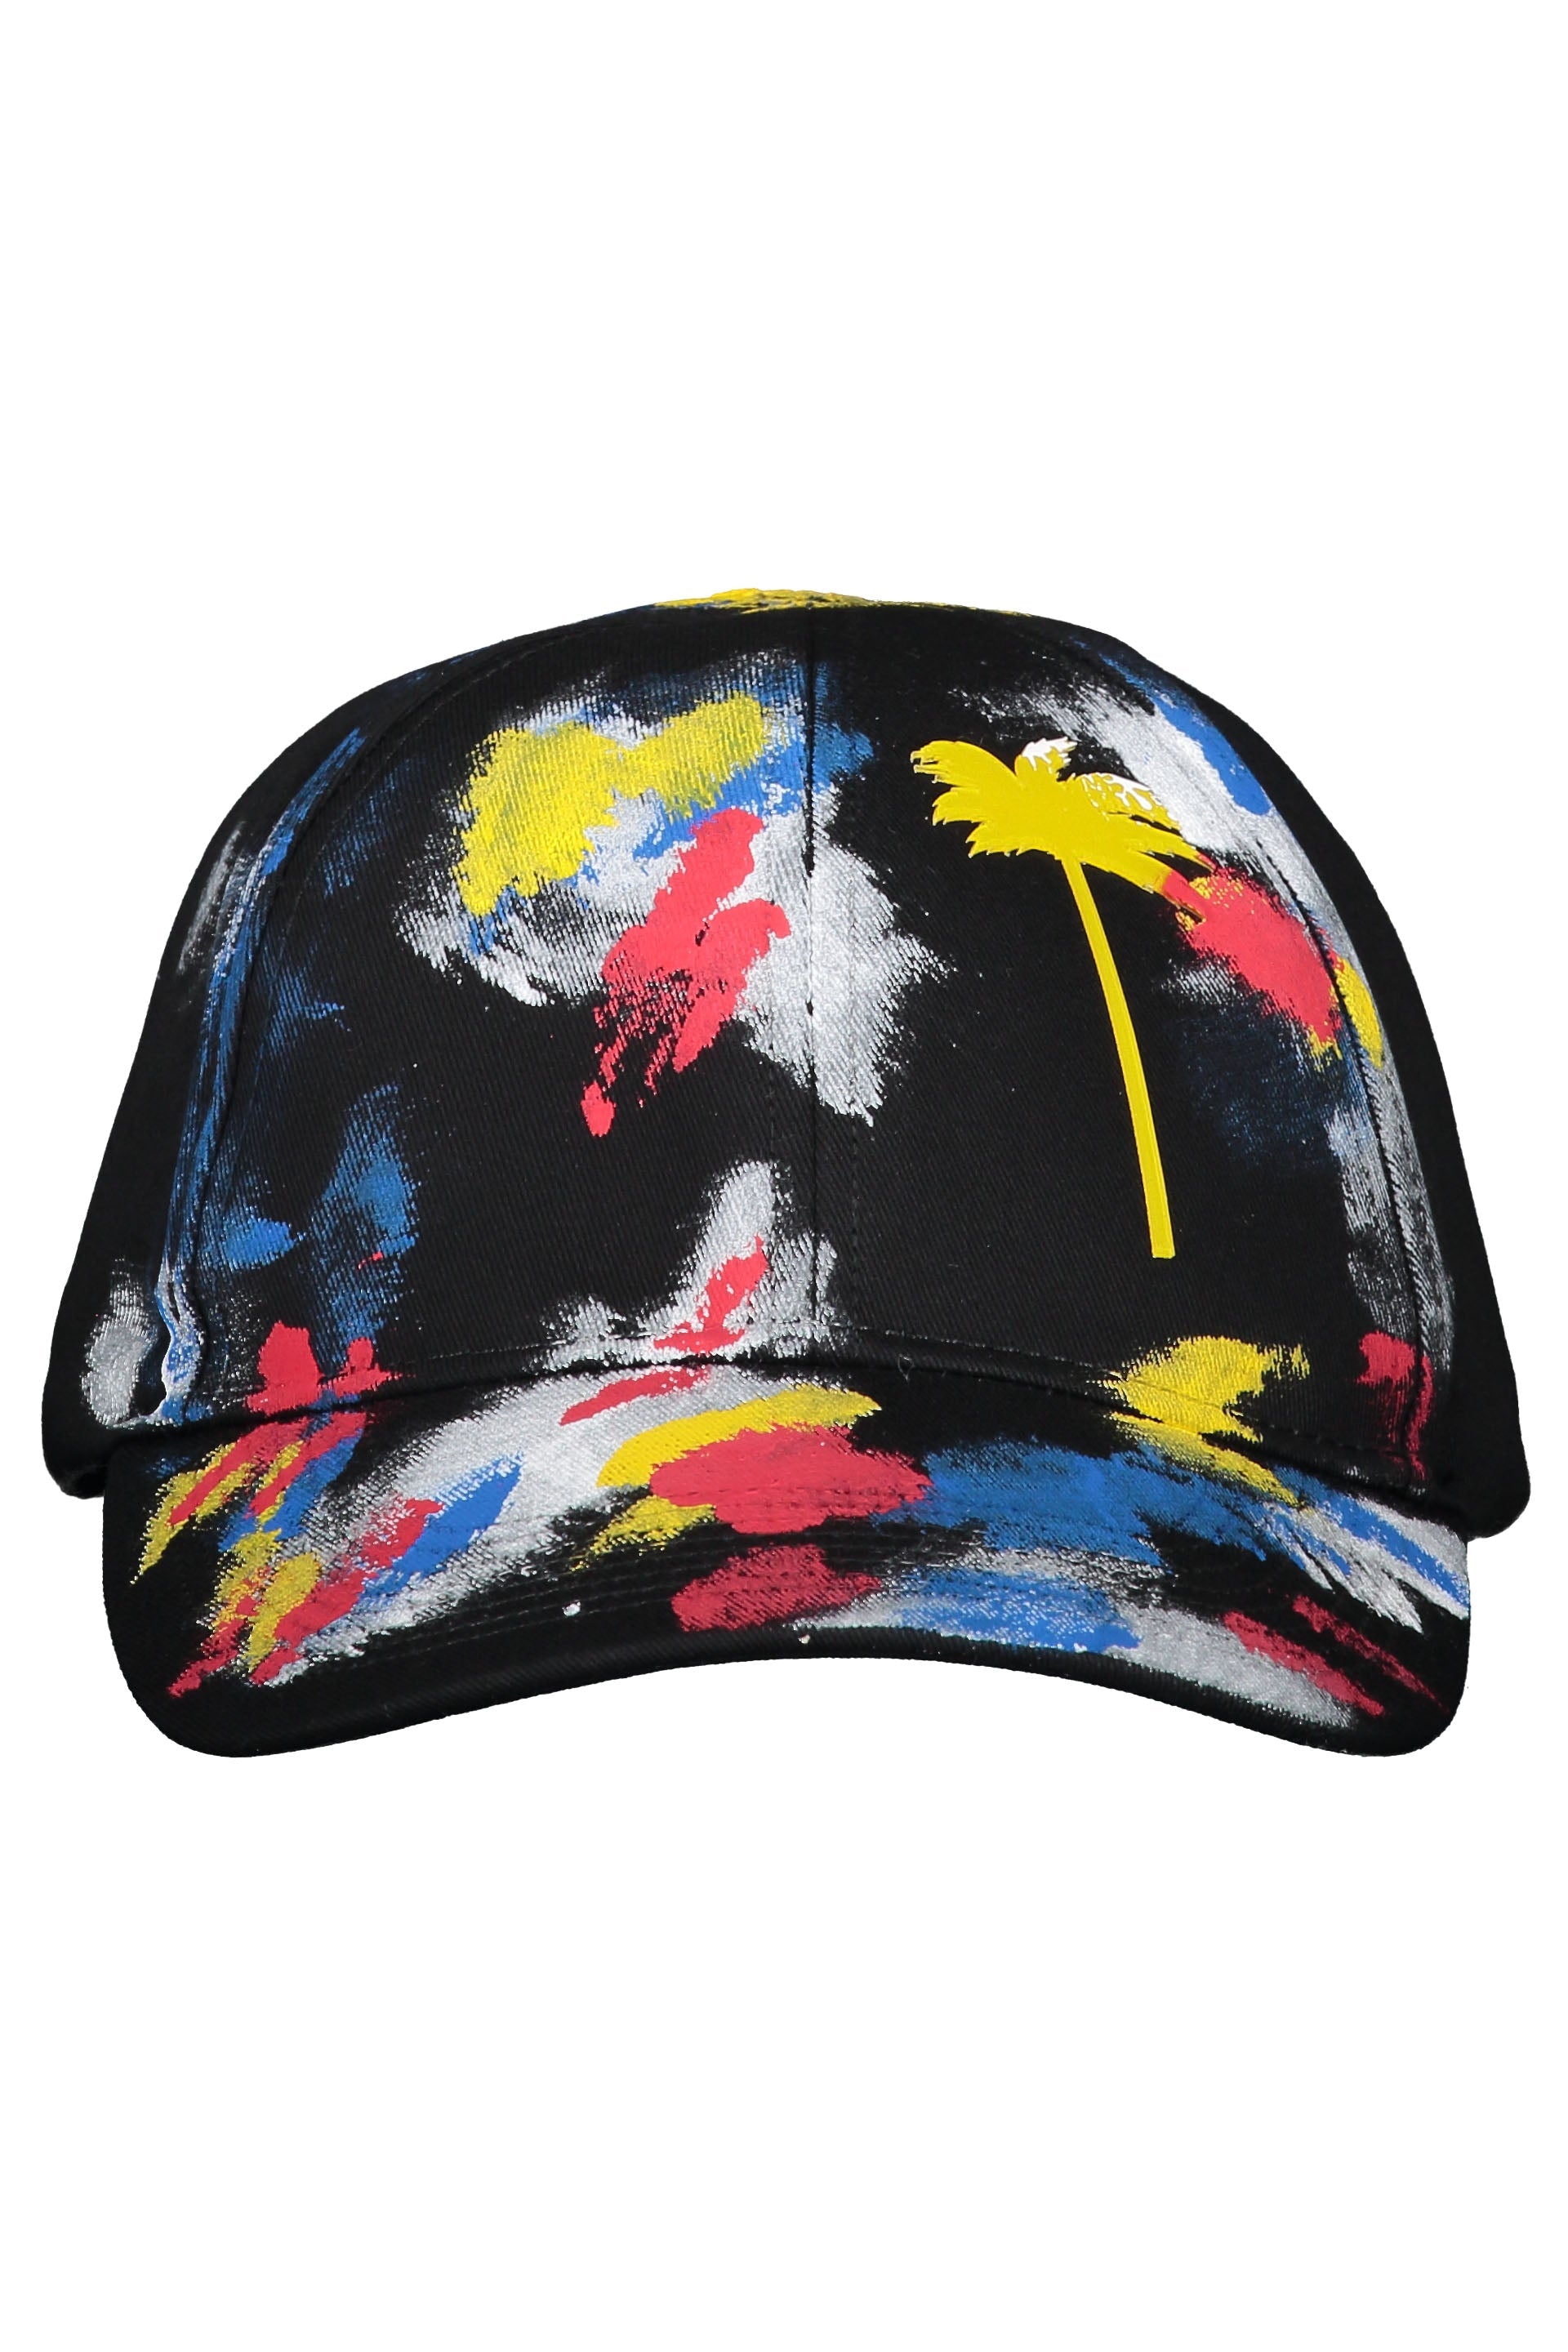 Palm-Angels-OUTLET-SALE-Baseball-cap-Hute-TU-ARCHIVE-COLLECTION-3.jpg